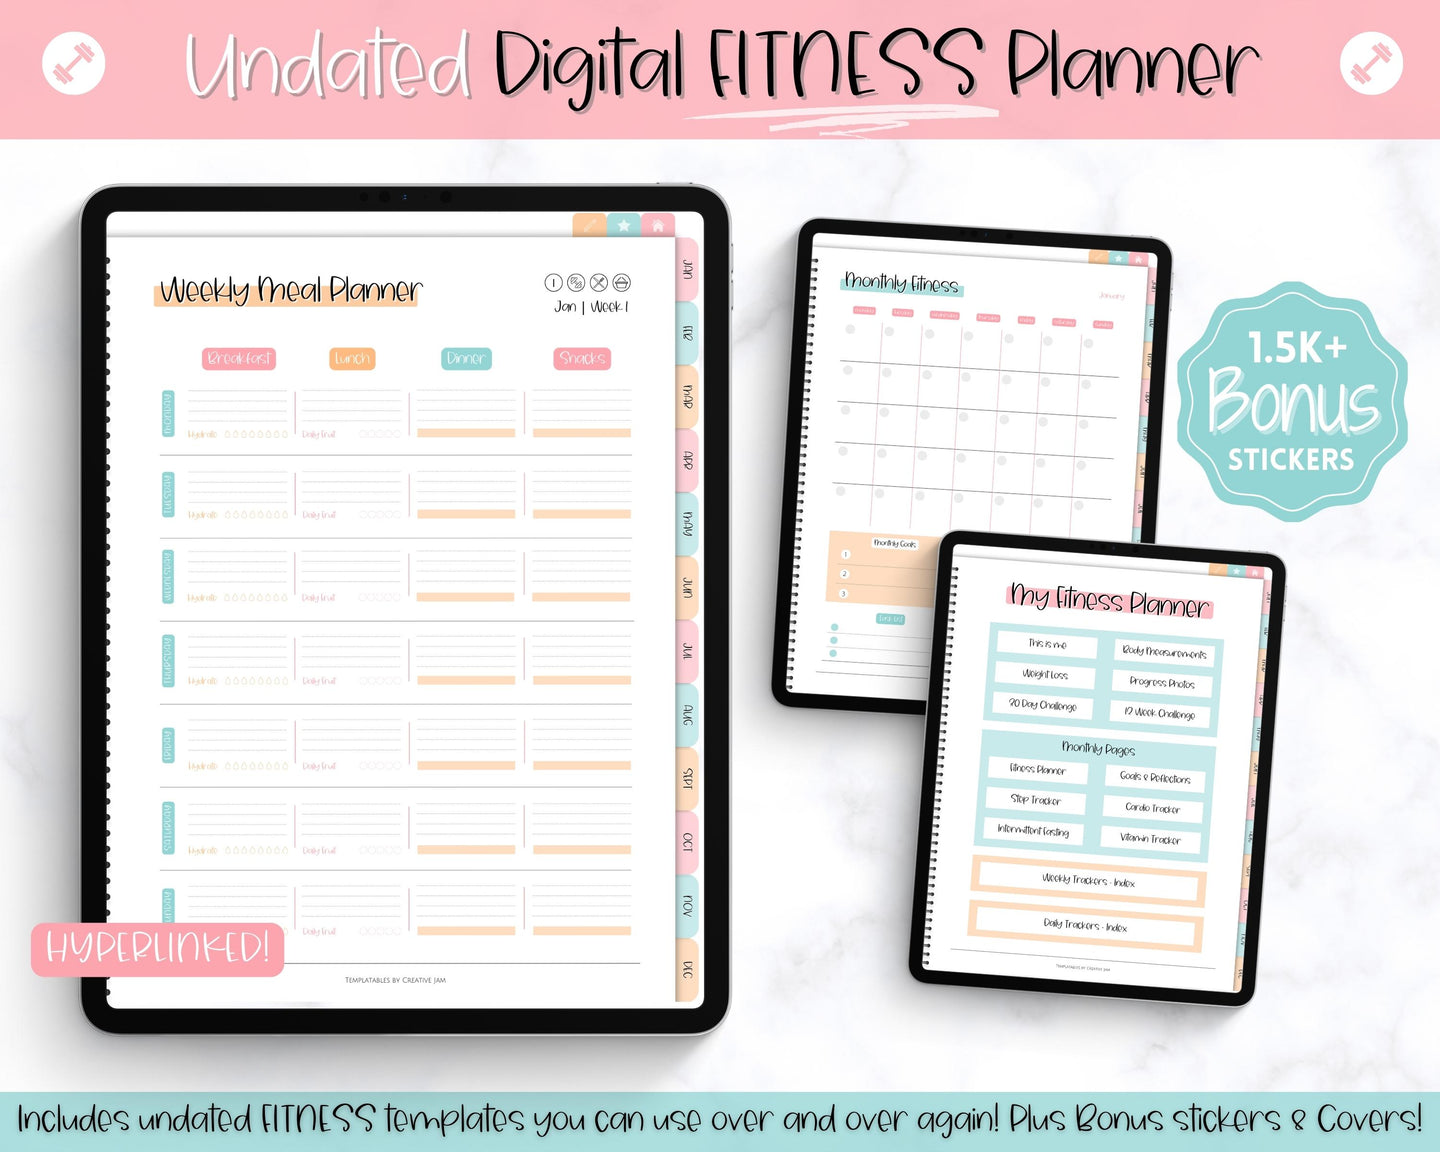 UNDATED Digital Fitness Planner | iPad GoodNotes Fitness Journal, Weight Loss Tracker & Workout Planner | Colorful Sky